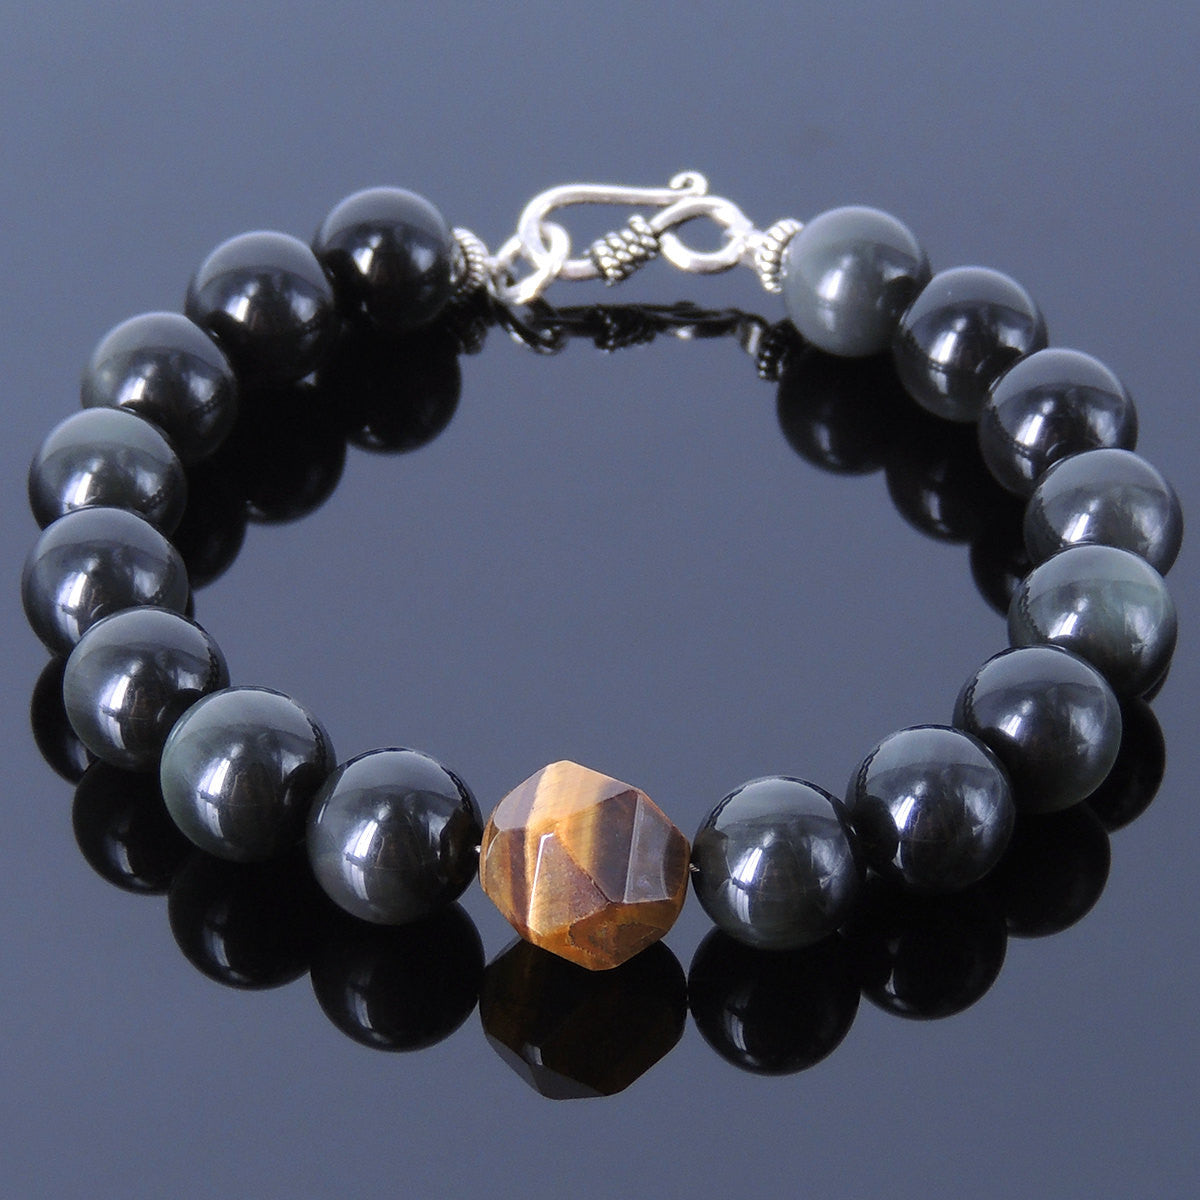 10mm Rainbow Black Obsidian & Faceted Brown Tiger Eye Healing Gemstone Bracelet with S925 Sterling Silver Spacer Beads & Clasp - Handmade by Gem & Silver BR122